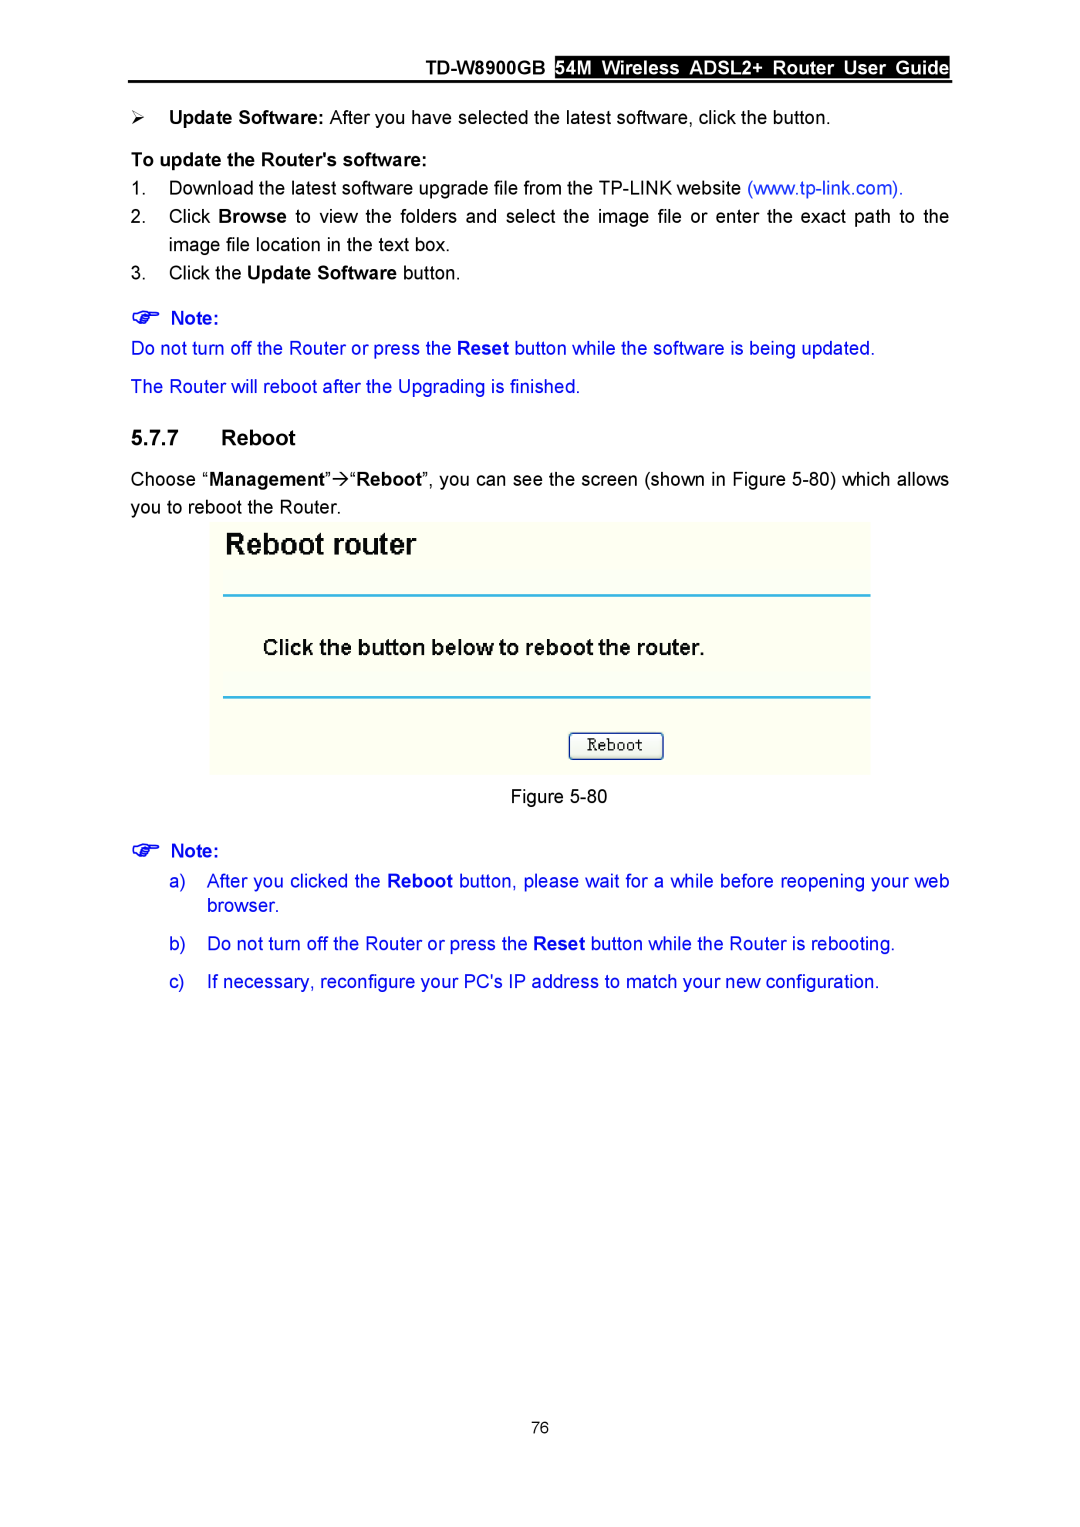 TP-Link manual Reboot, TD-W8900GB 54M Wireless ADSL2+ Router User Guide, To update the Routers software 